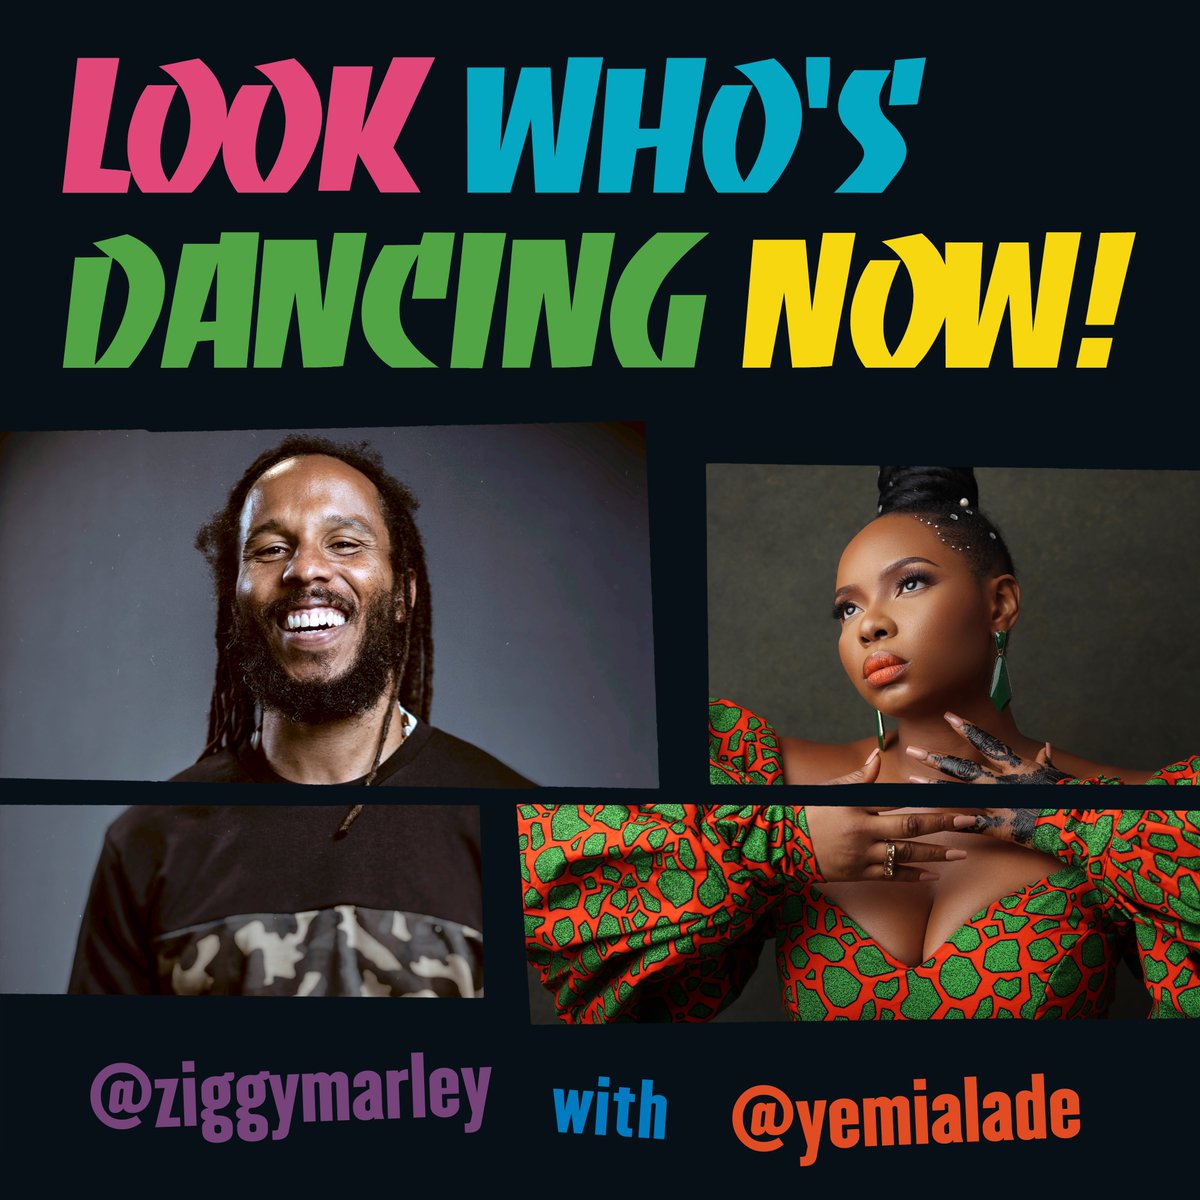 Even though the bars in the Netherlands close at 8, you don't have to stop dancing with this new @ziggymarley track! 🕺 'Look Who's Dancing Now' is out now! Listen here: orcd.co/lookwhosdancin…